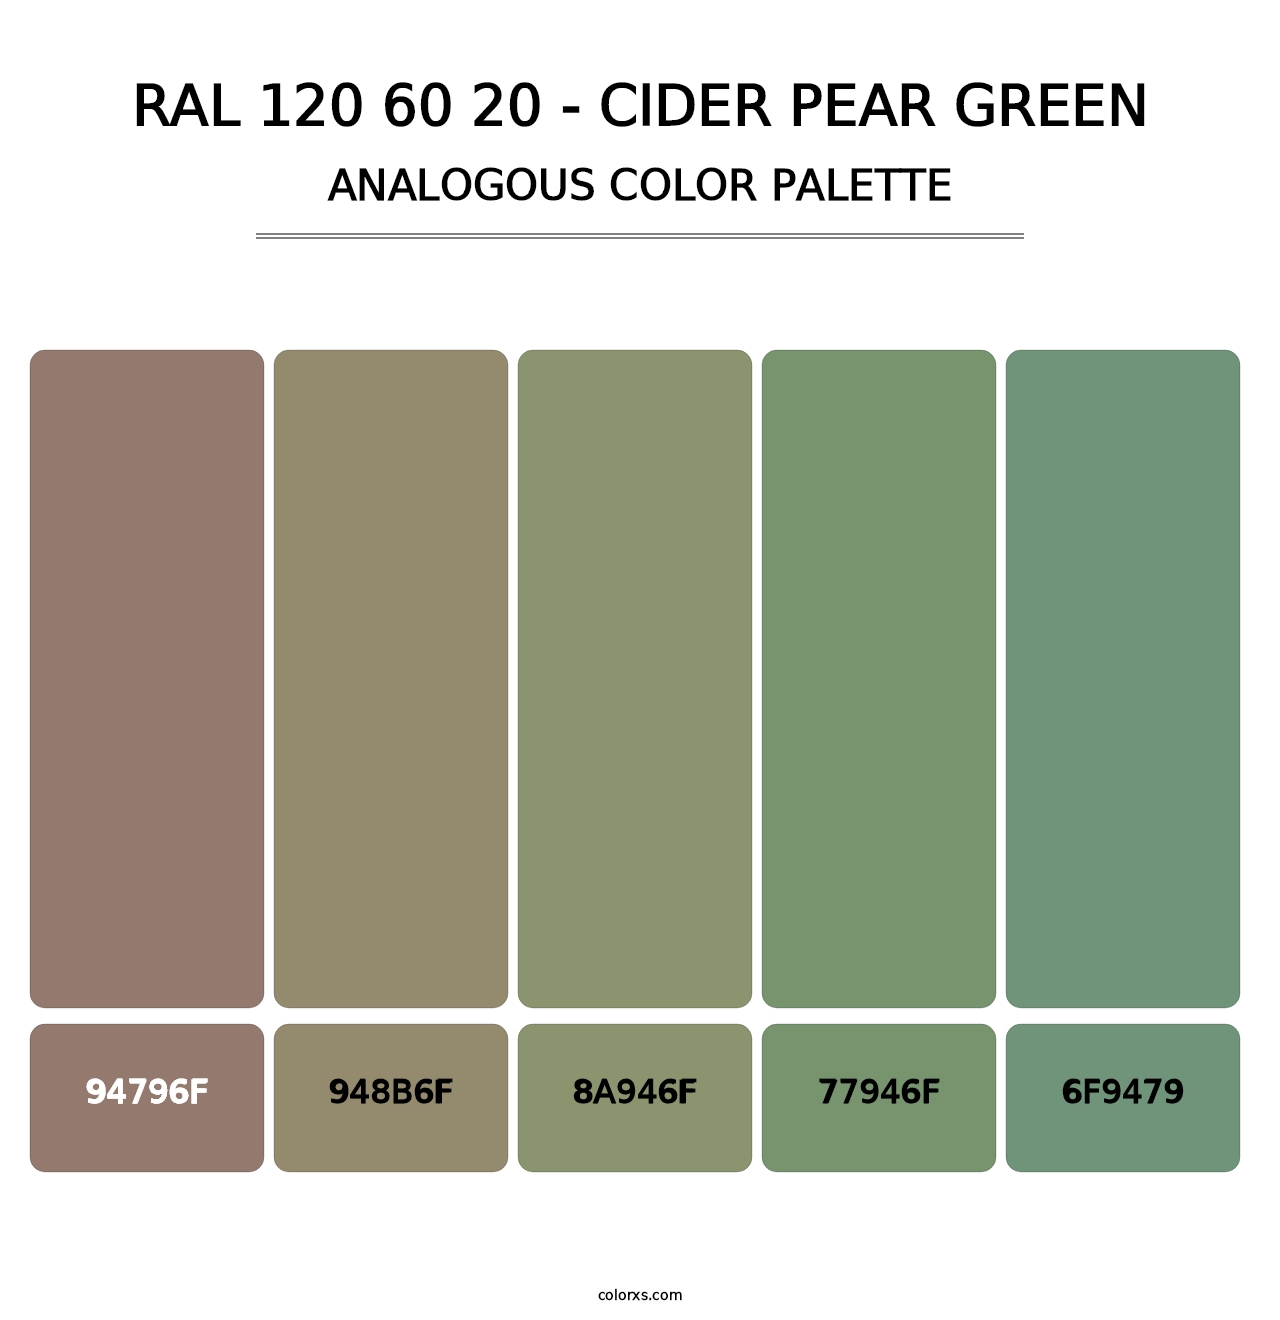 RAL 120 60 20 - Cider Pear Green - Analogous Color Palette